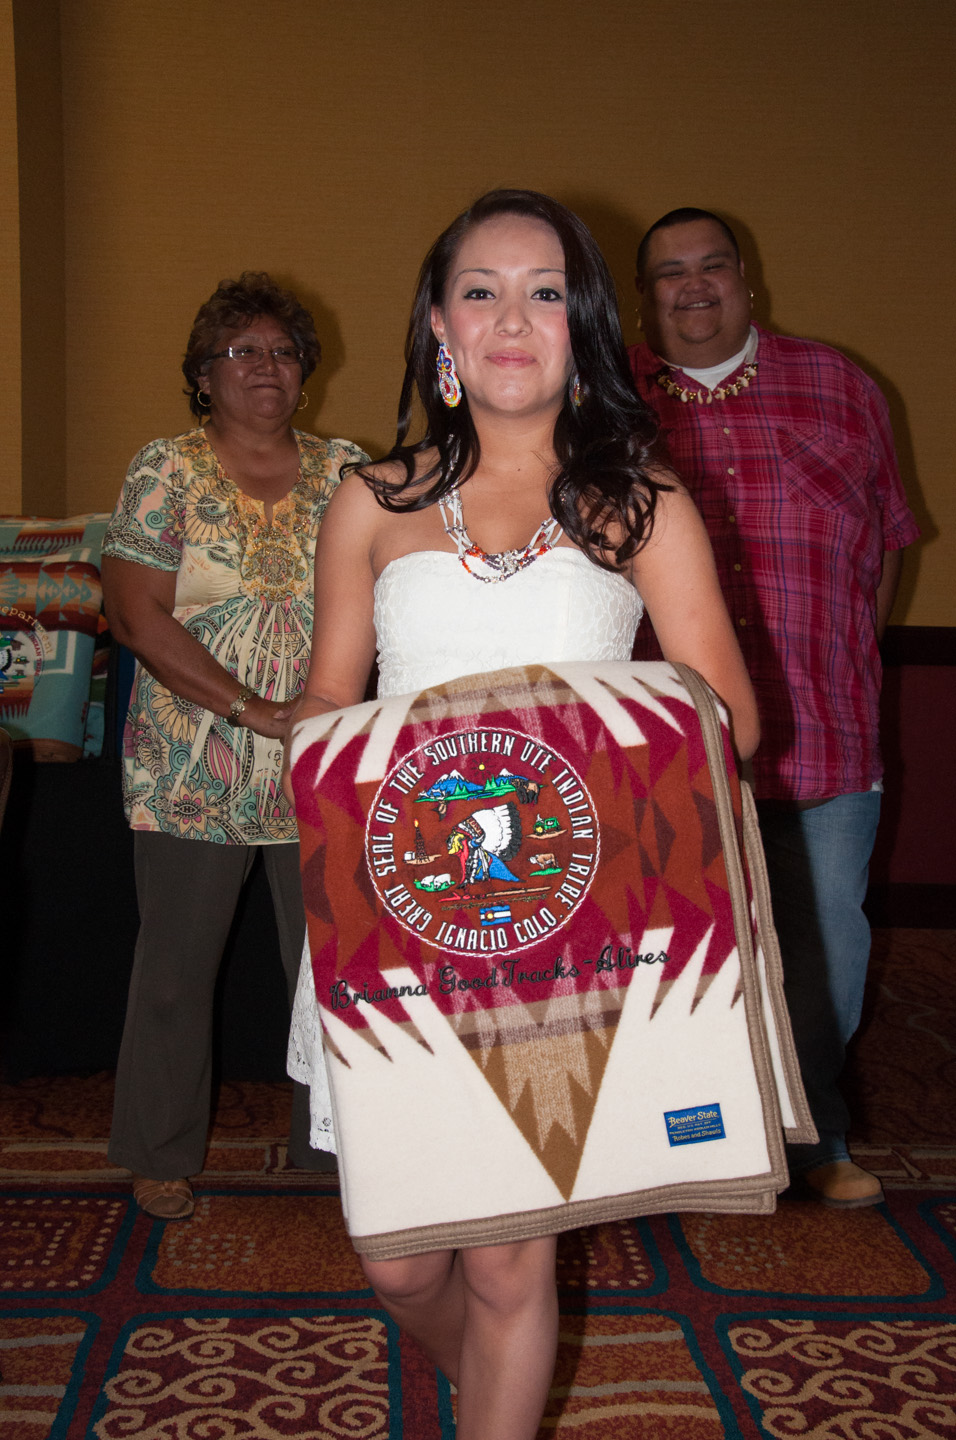 Bayfield High School graduate Brianna Goodtracks-Alires accepts a Pendleton blanket from Southern Ute Indian Tribal Council Lady Ramona Y. Eagle (left) and Chairman Jimmy R. Newton Jr. (right) during the Education & Johnson O’Malley Annual Banquet on Saturday, June 22 at the Sky Ute Casino Resort.